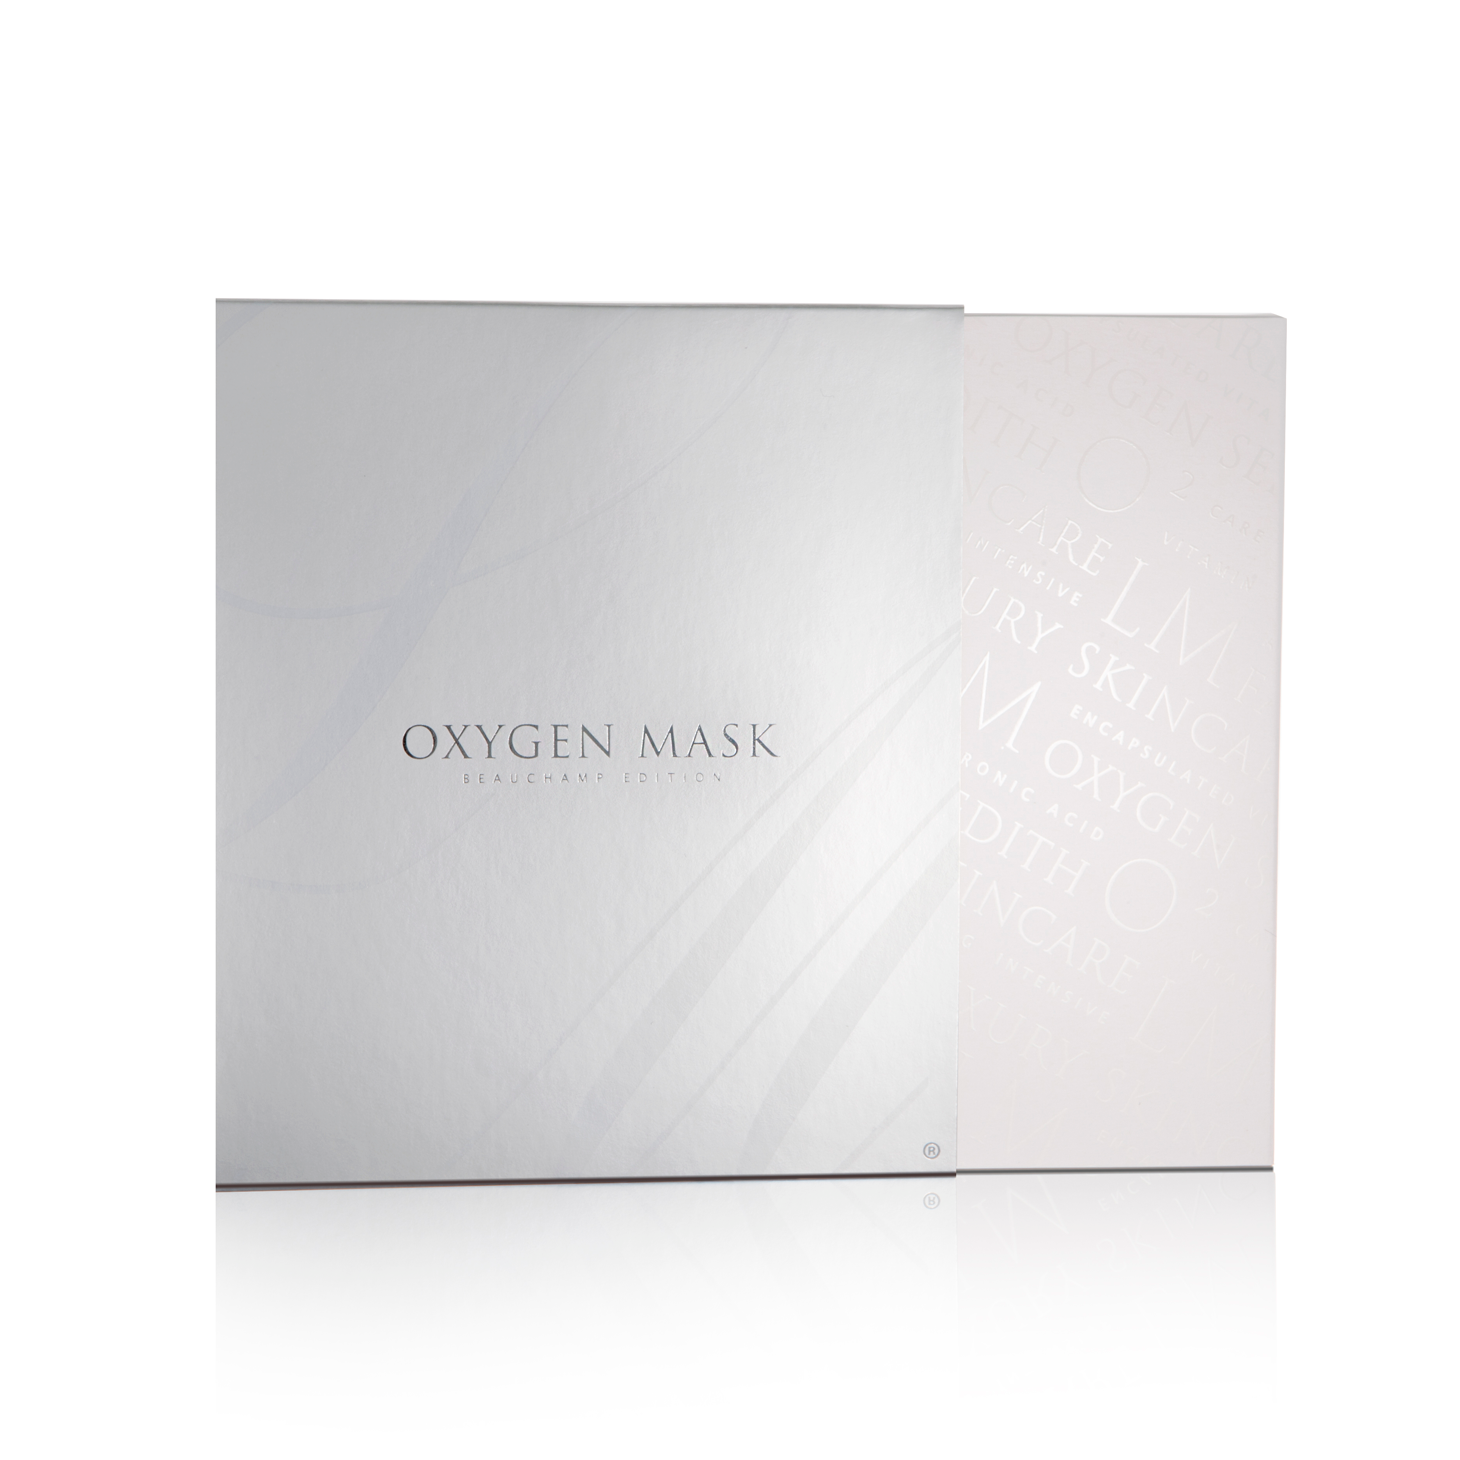 LMR18OxygenMask2730x730_2xpx.png